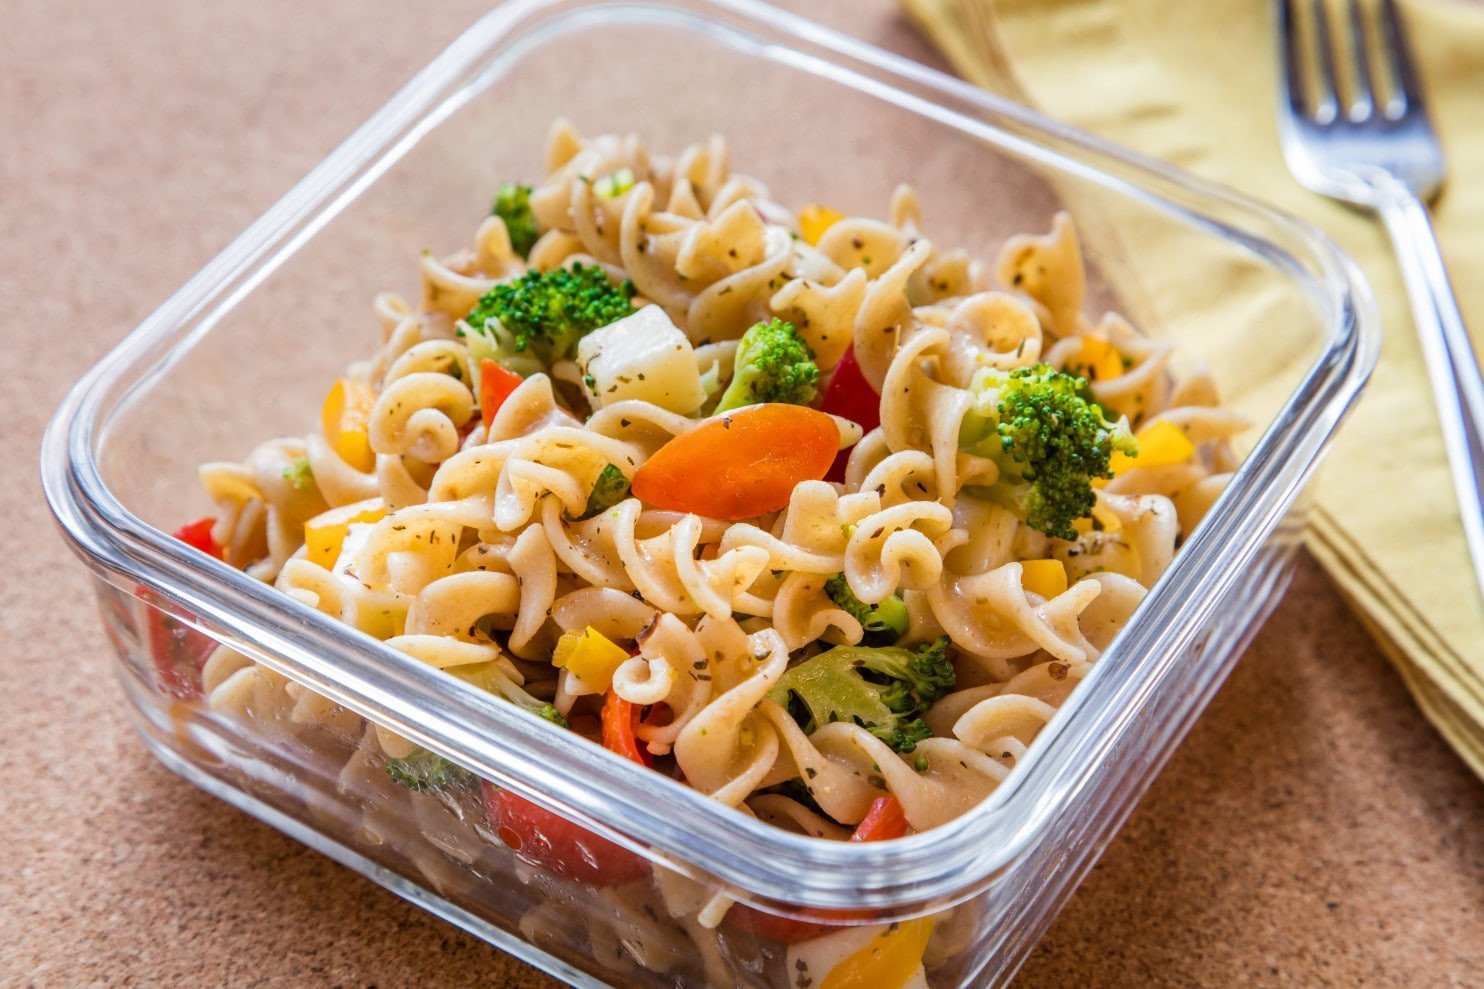 Pasta Salad Boxed
 This pasta salad has touches that make it ideal for a